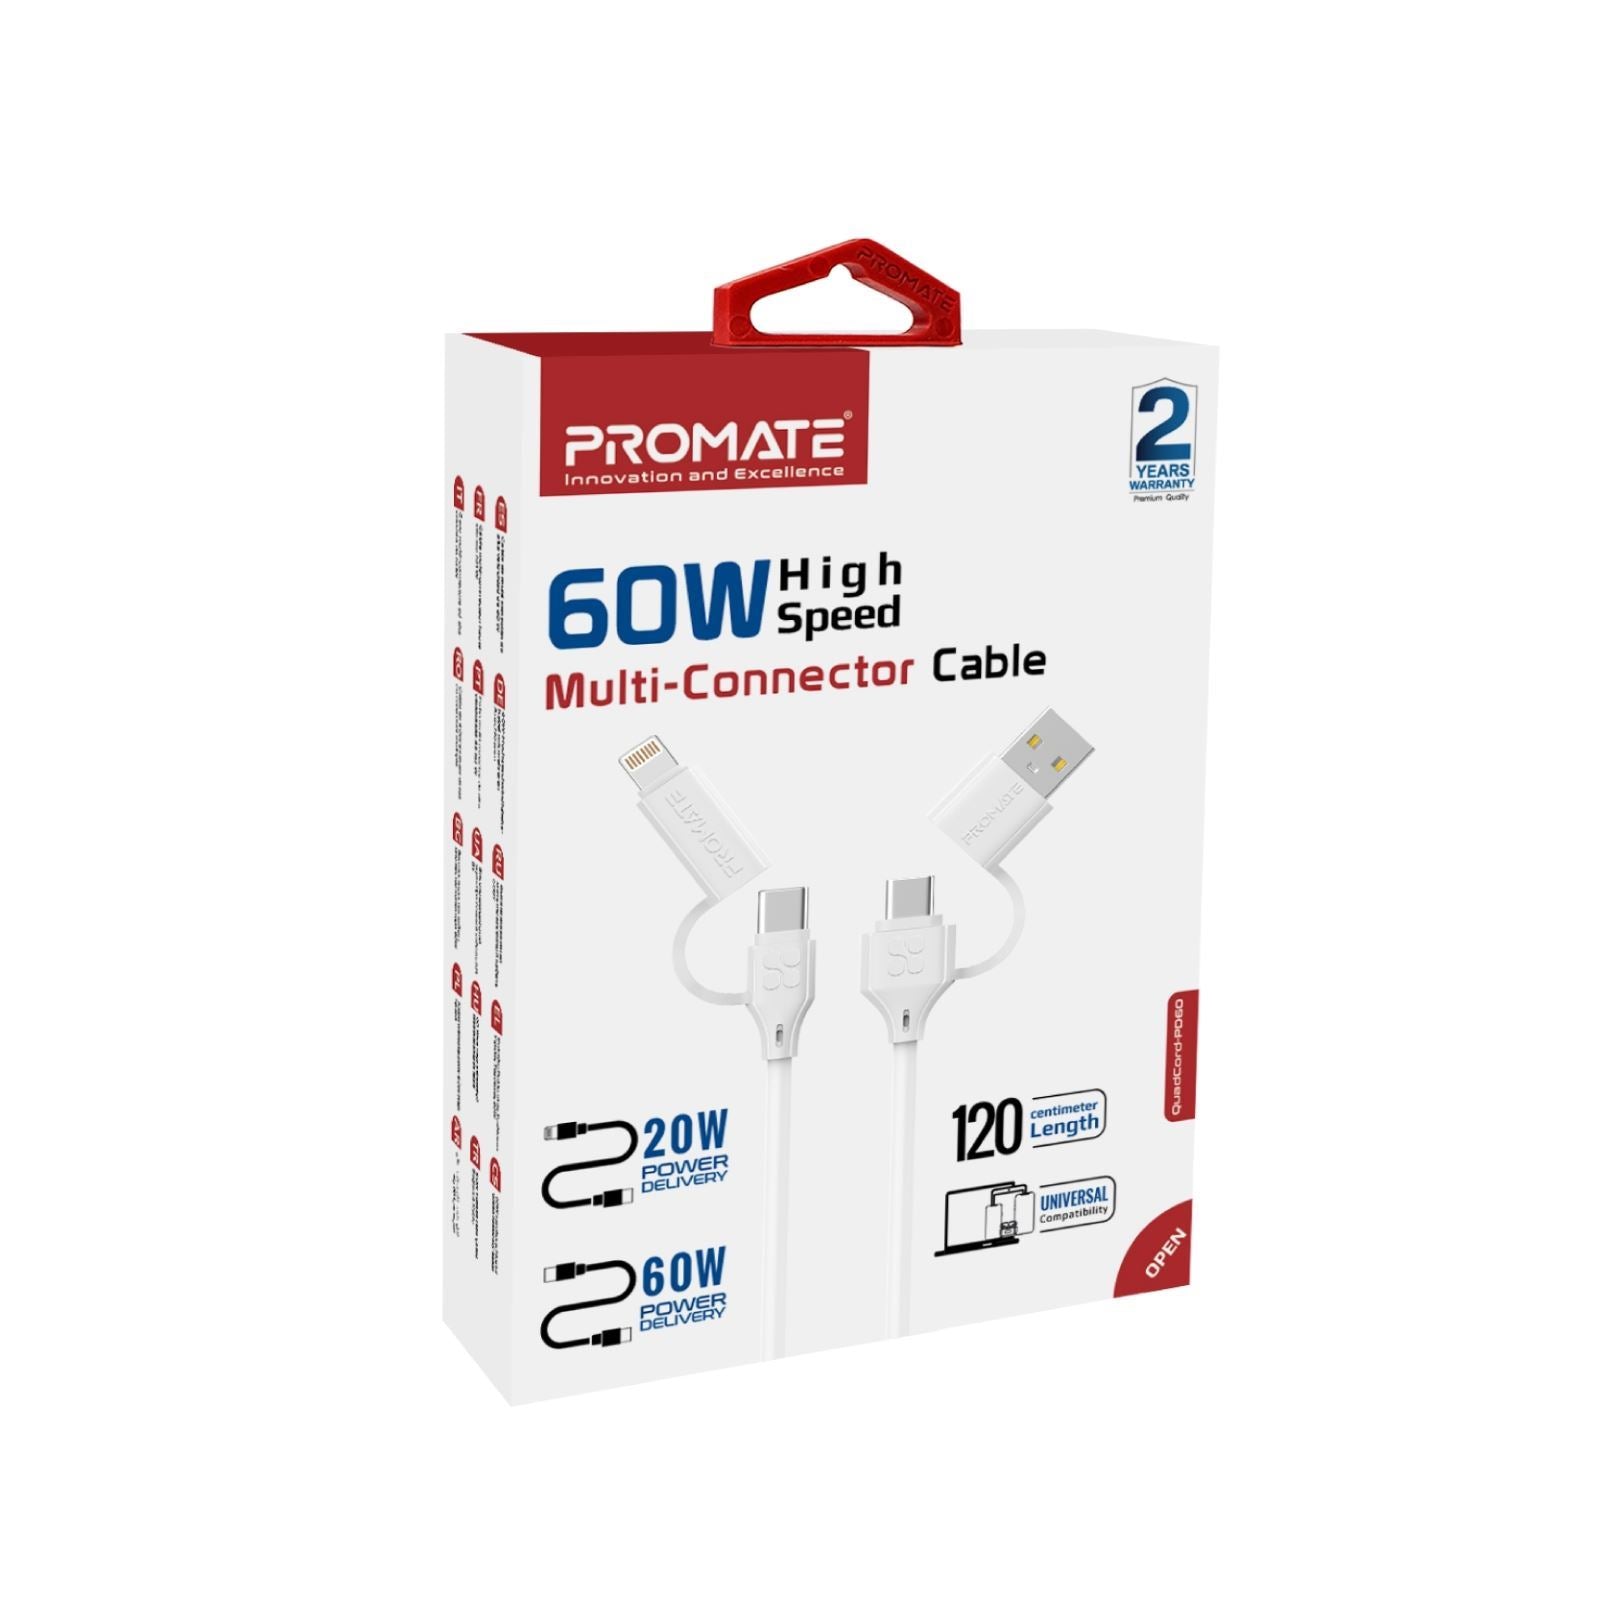 PROMATE_1.2m_60W_4-in-1_Braided_Cable_with_USB-C,_Lightning,_USB-A_Interchangeable_Connectors._Transfer_rate_480Mbps._Up_to_15000_Bend_Life_Span._White_Colour 1737